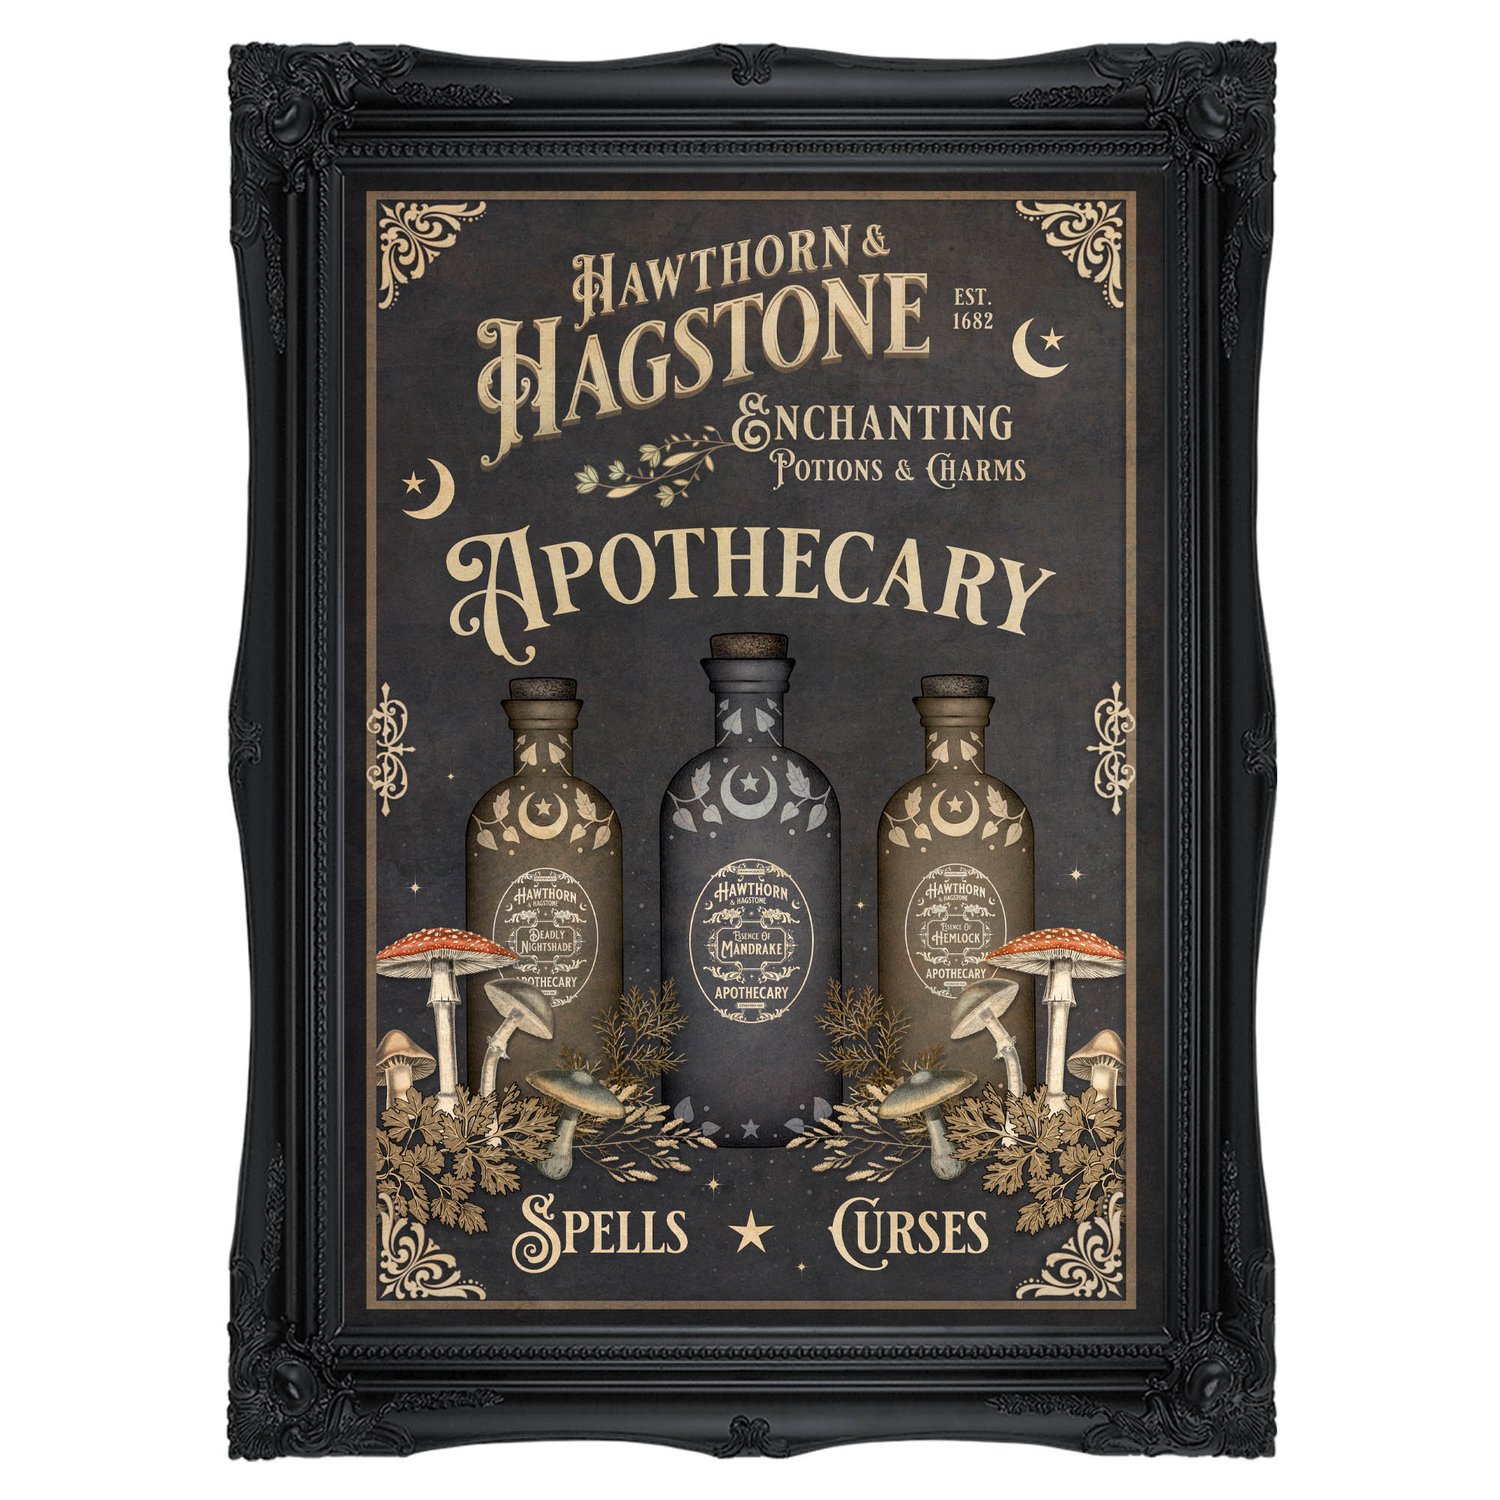 Vintage apothecary sign - Hawthorn & Hagstone with apothecary